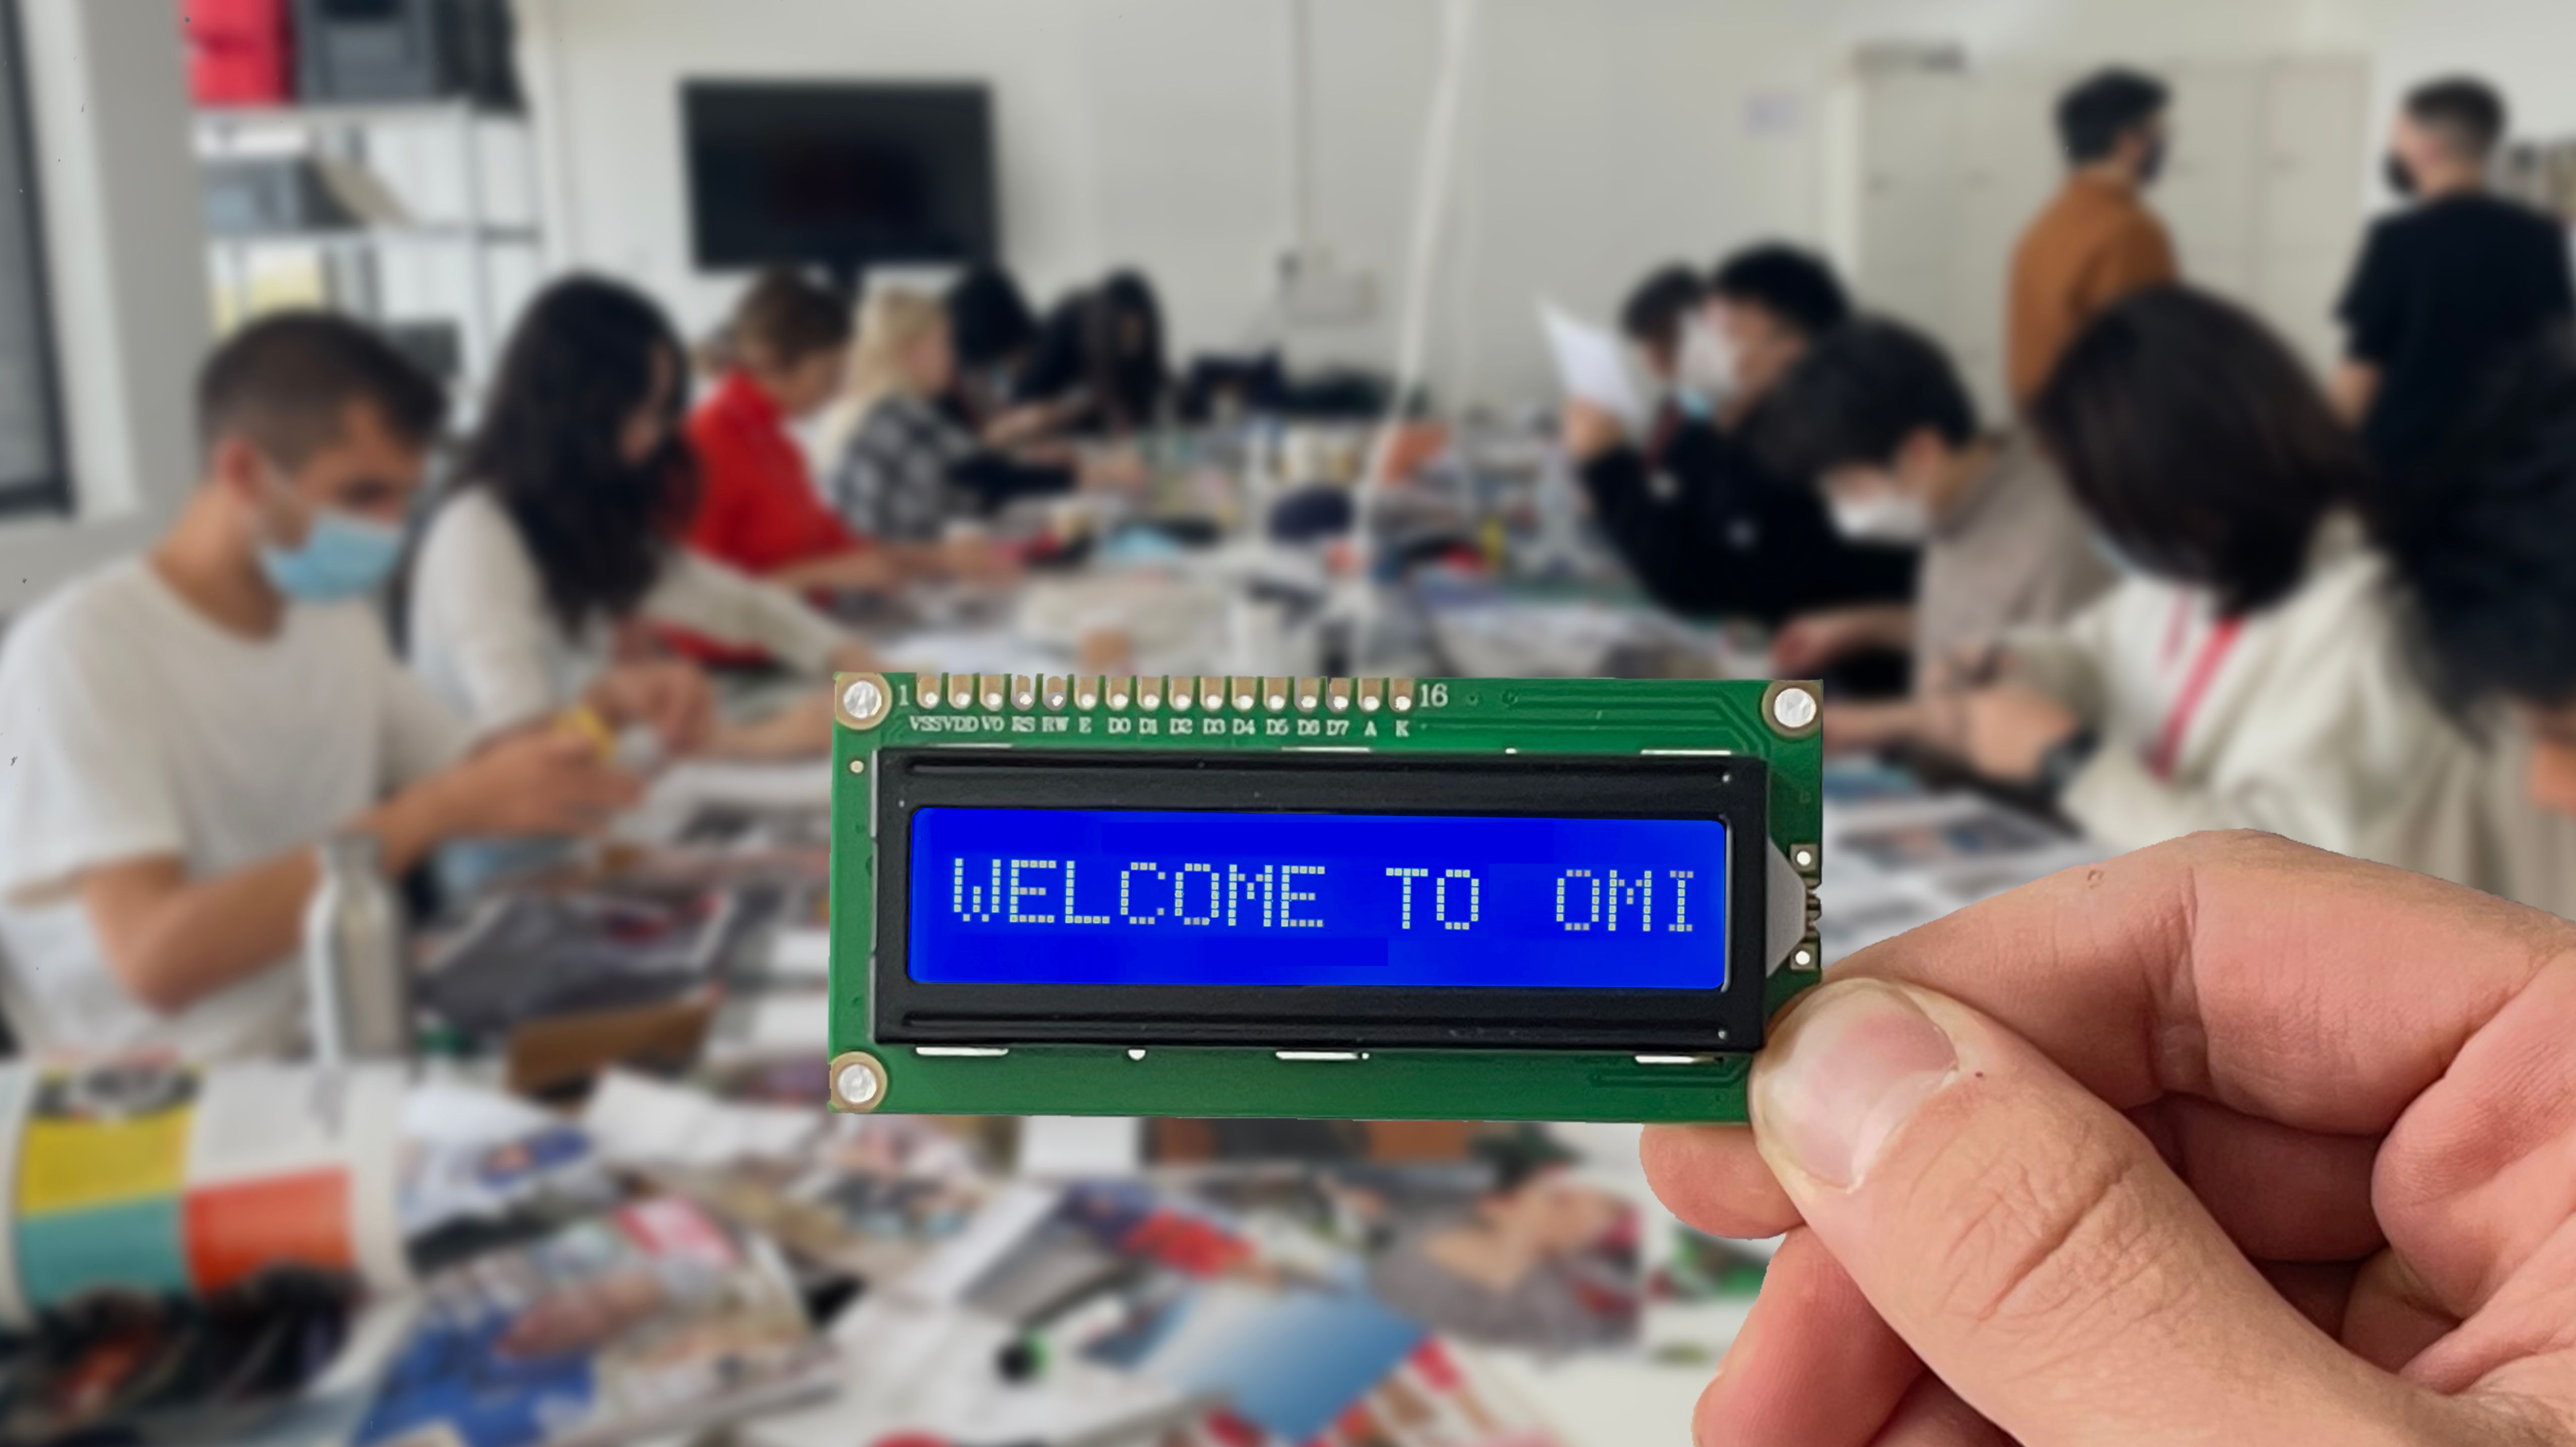 Photograph of a hand holding up a computer chip with the words 'Welcome to OMI' on it, in front of a long table covered in materials, at which people are sat, working, on either side.